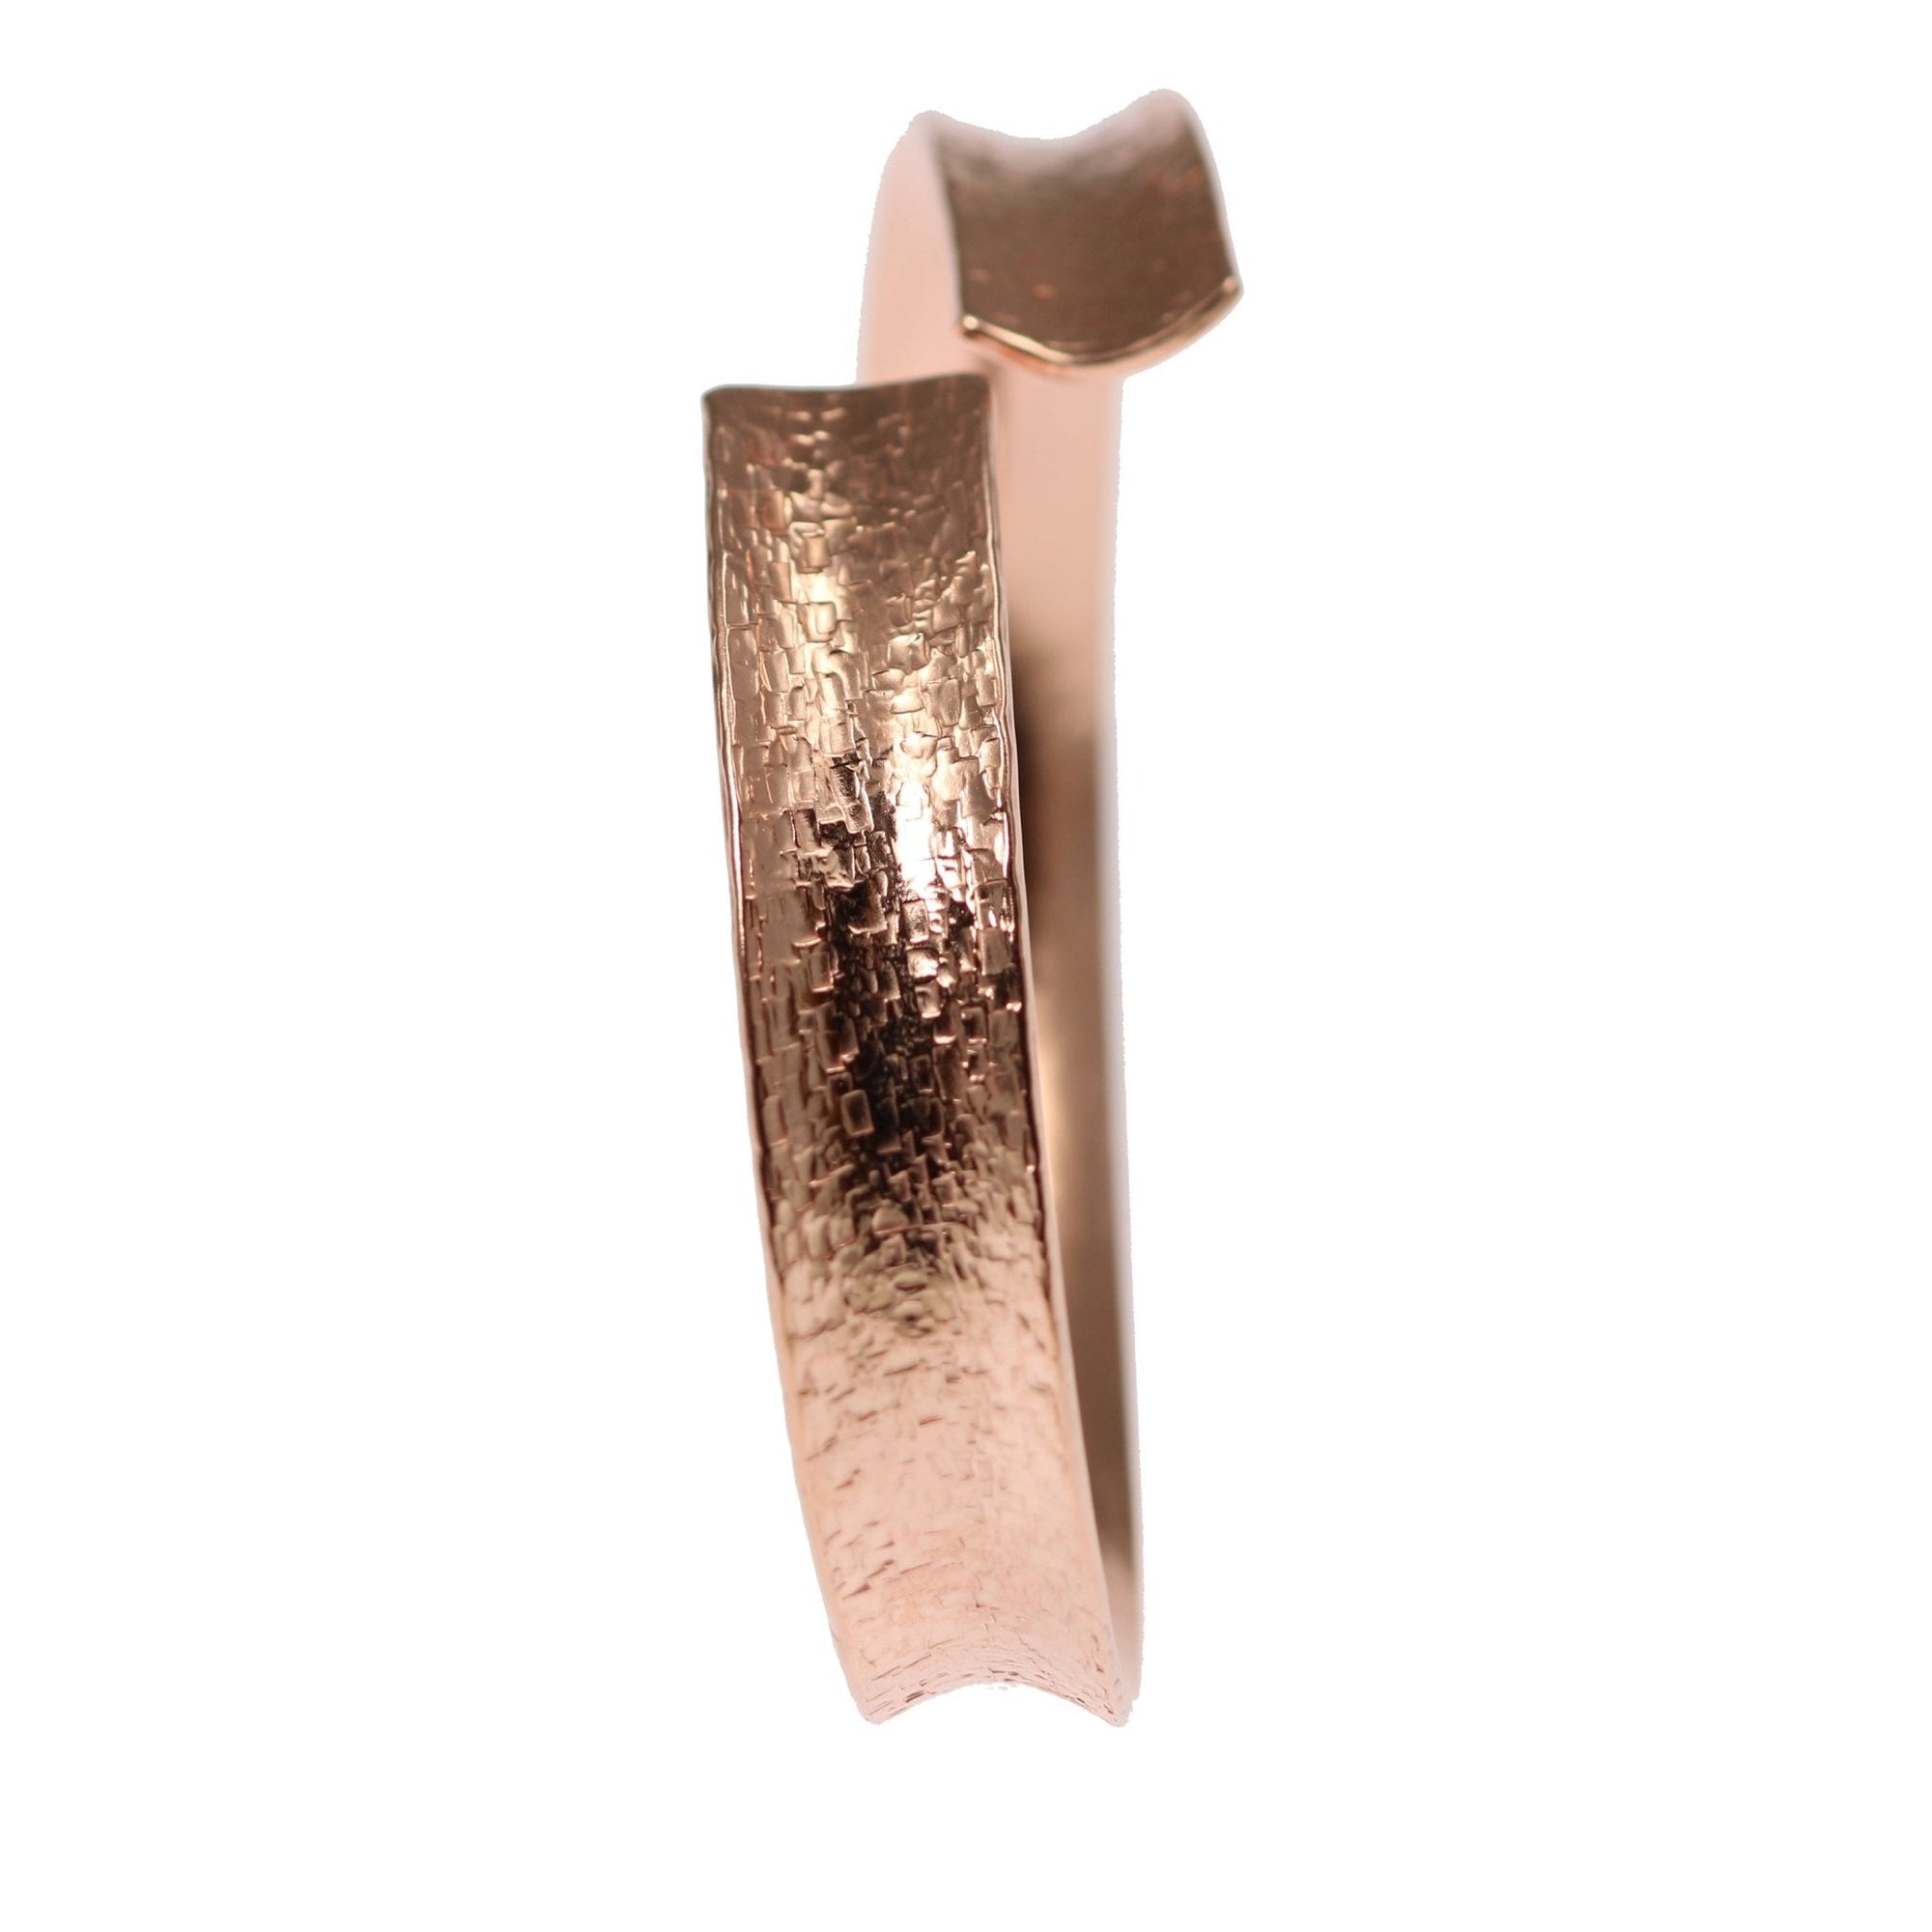 Side View of Anticlastic Texturized Copper Bangle Bracelet